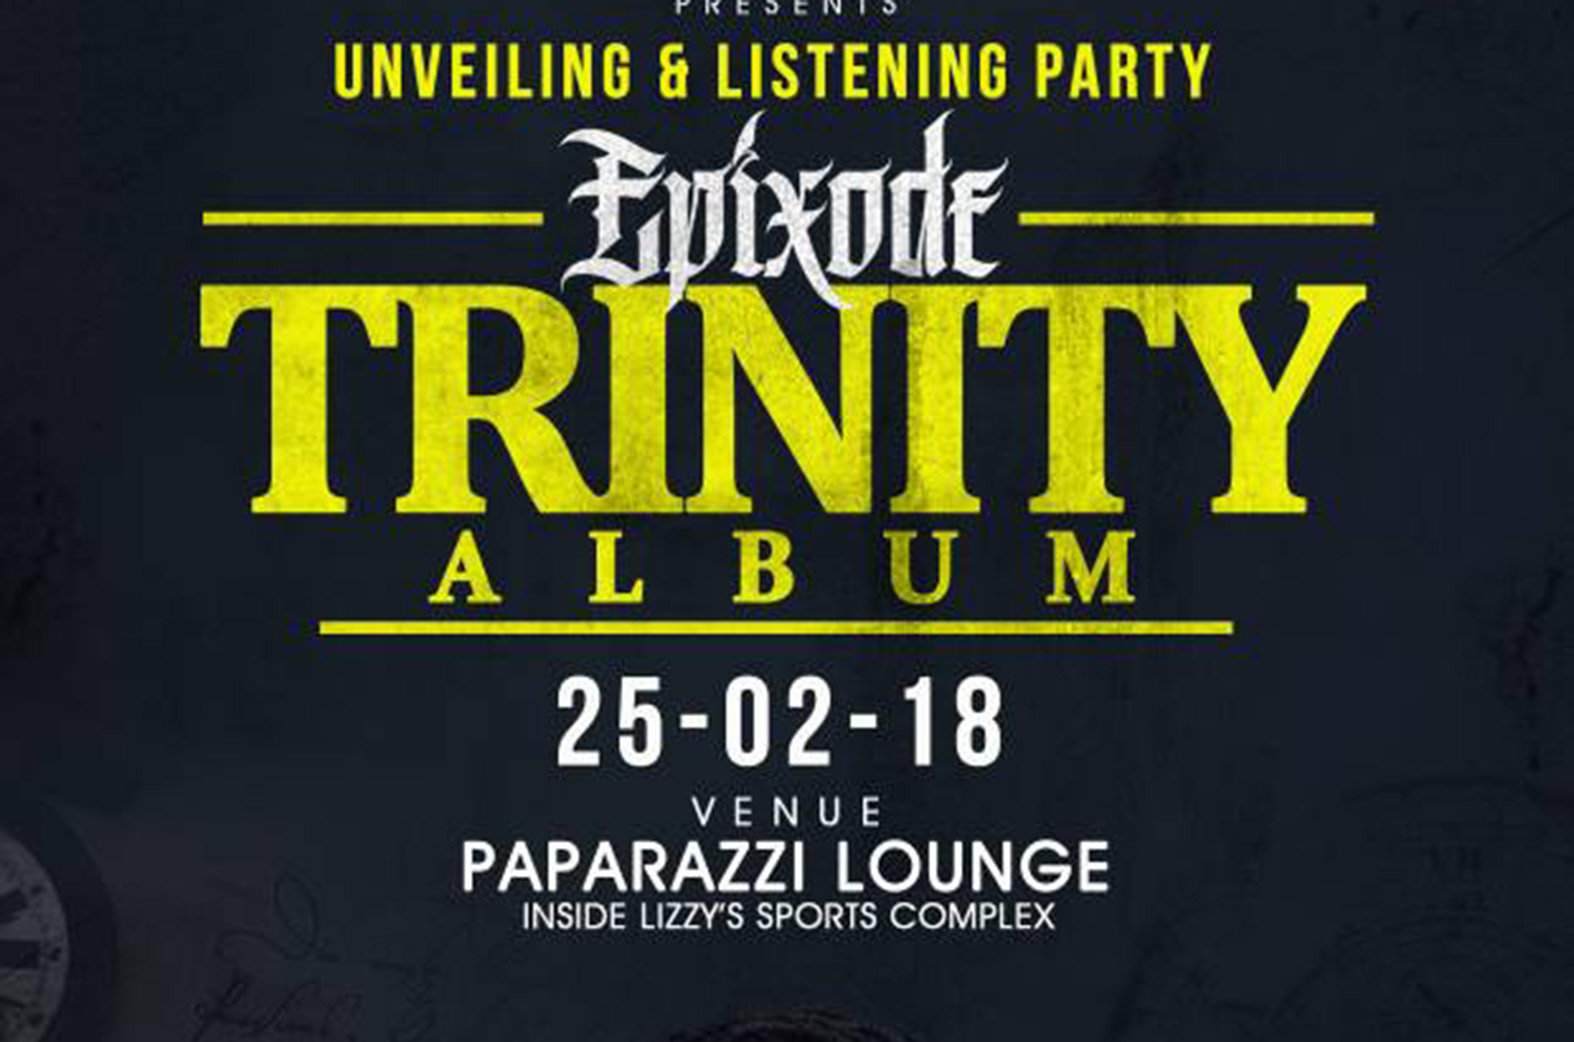 Epixode announces February 25th for “Trinity” listening